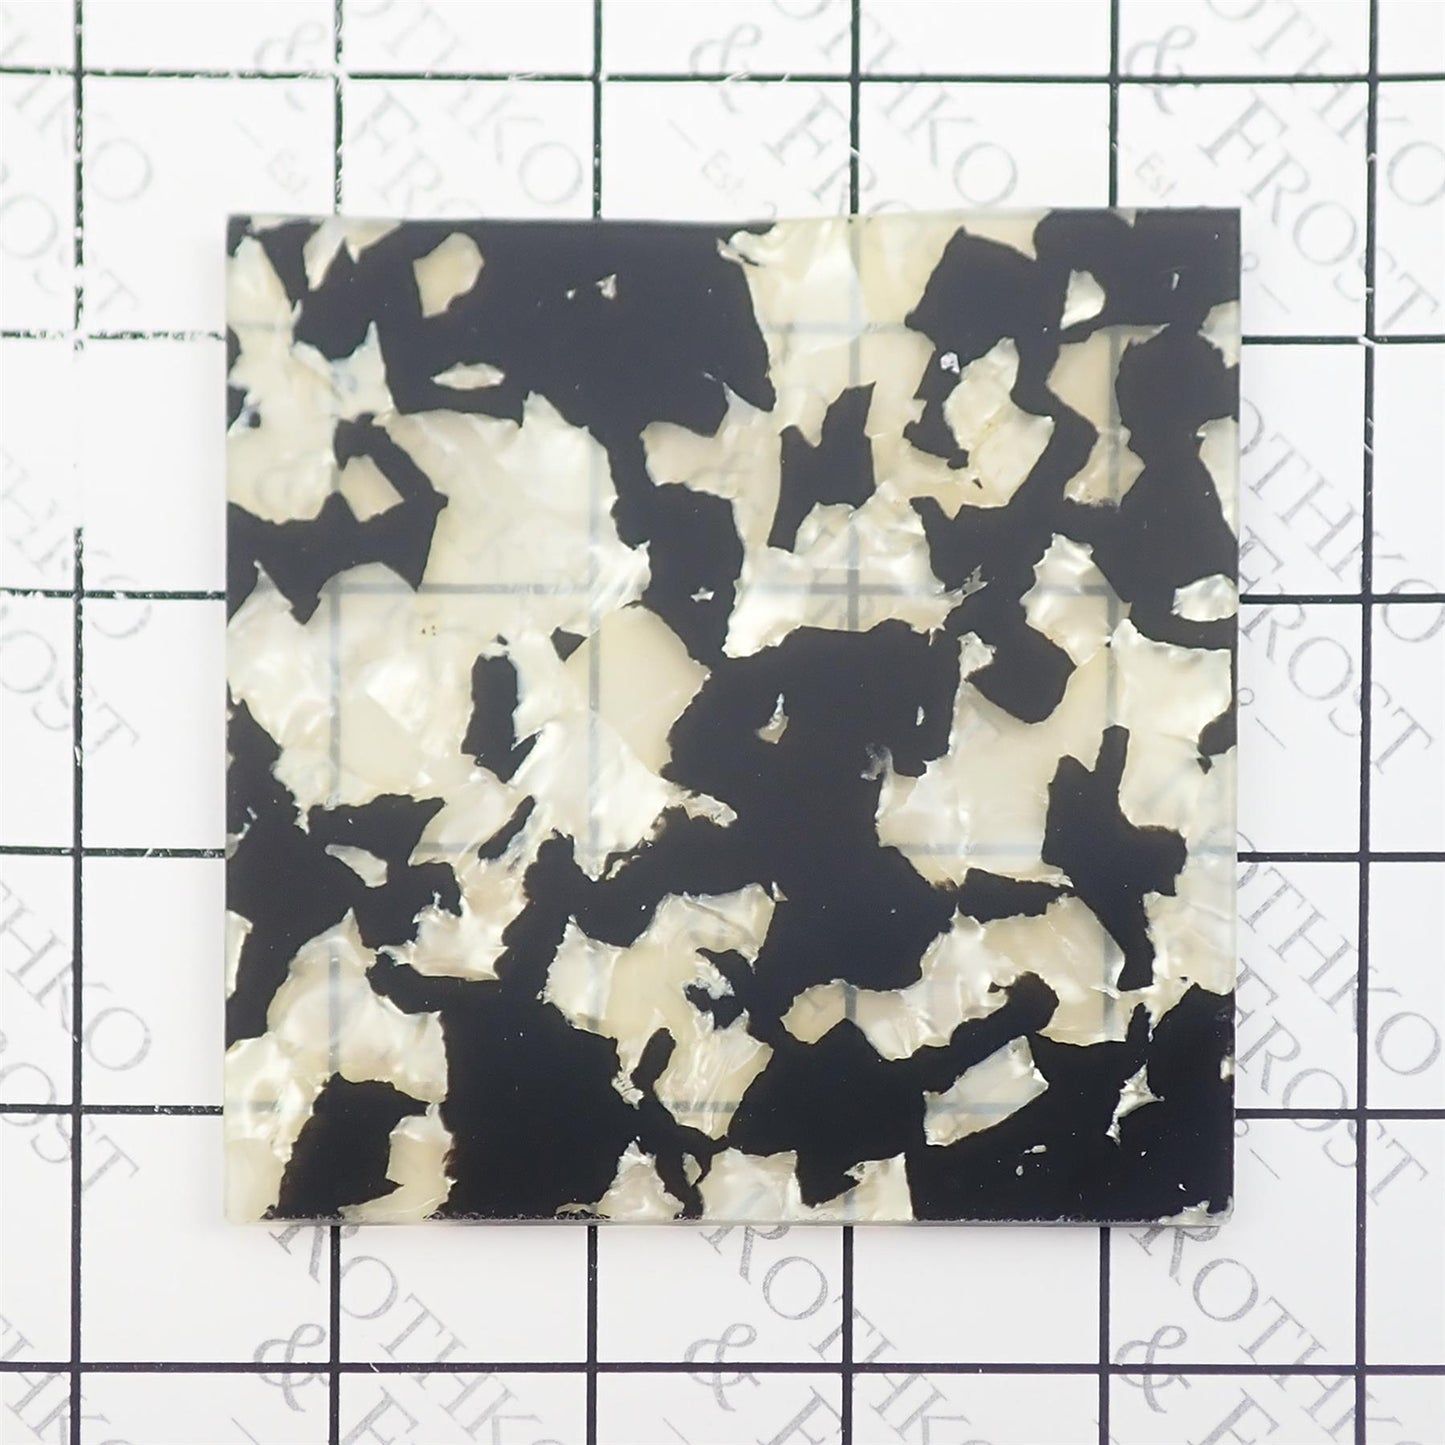 Incudo Black and White Pearloid Celluloid Laminate Acrylic Sheet - 300x250x3mm